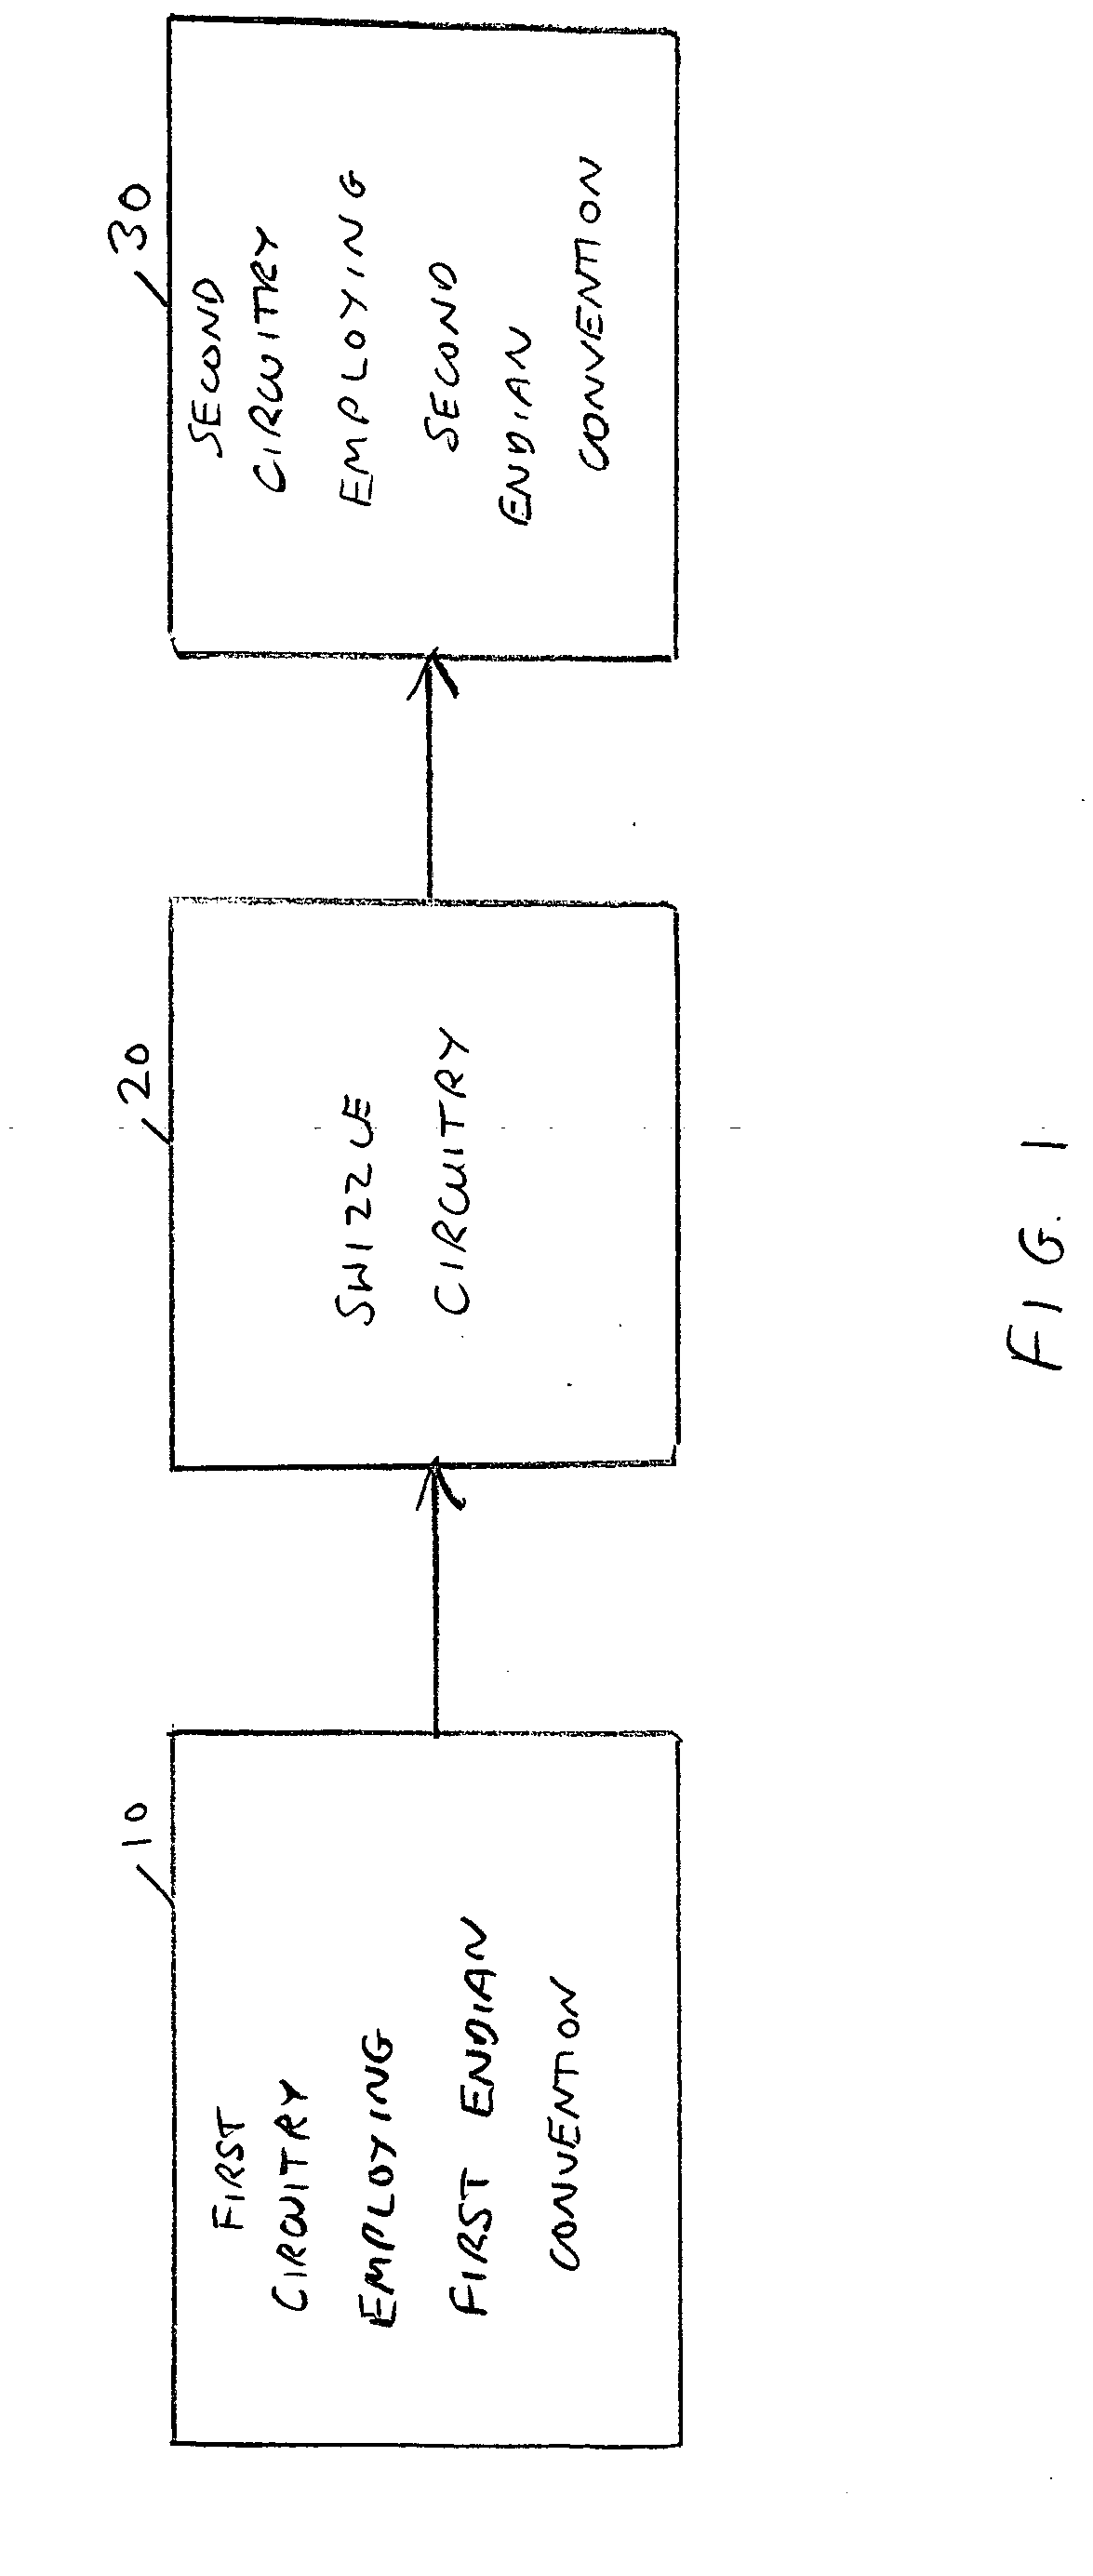 Data processing apparatus and method for converting data values between endian formats